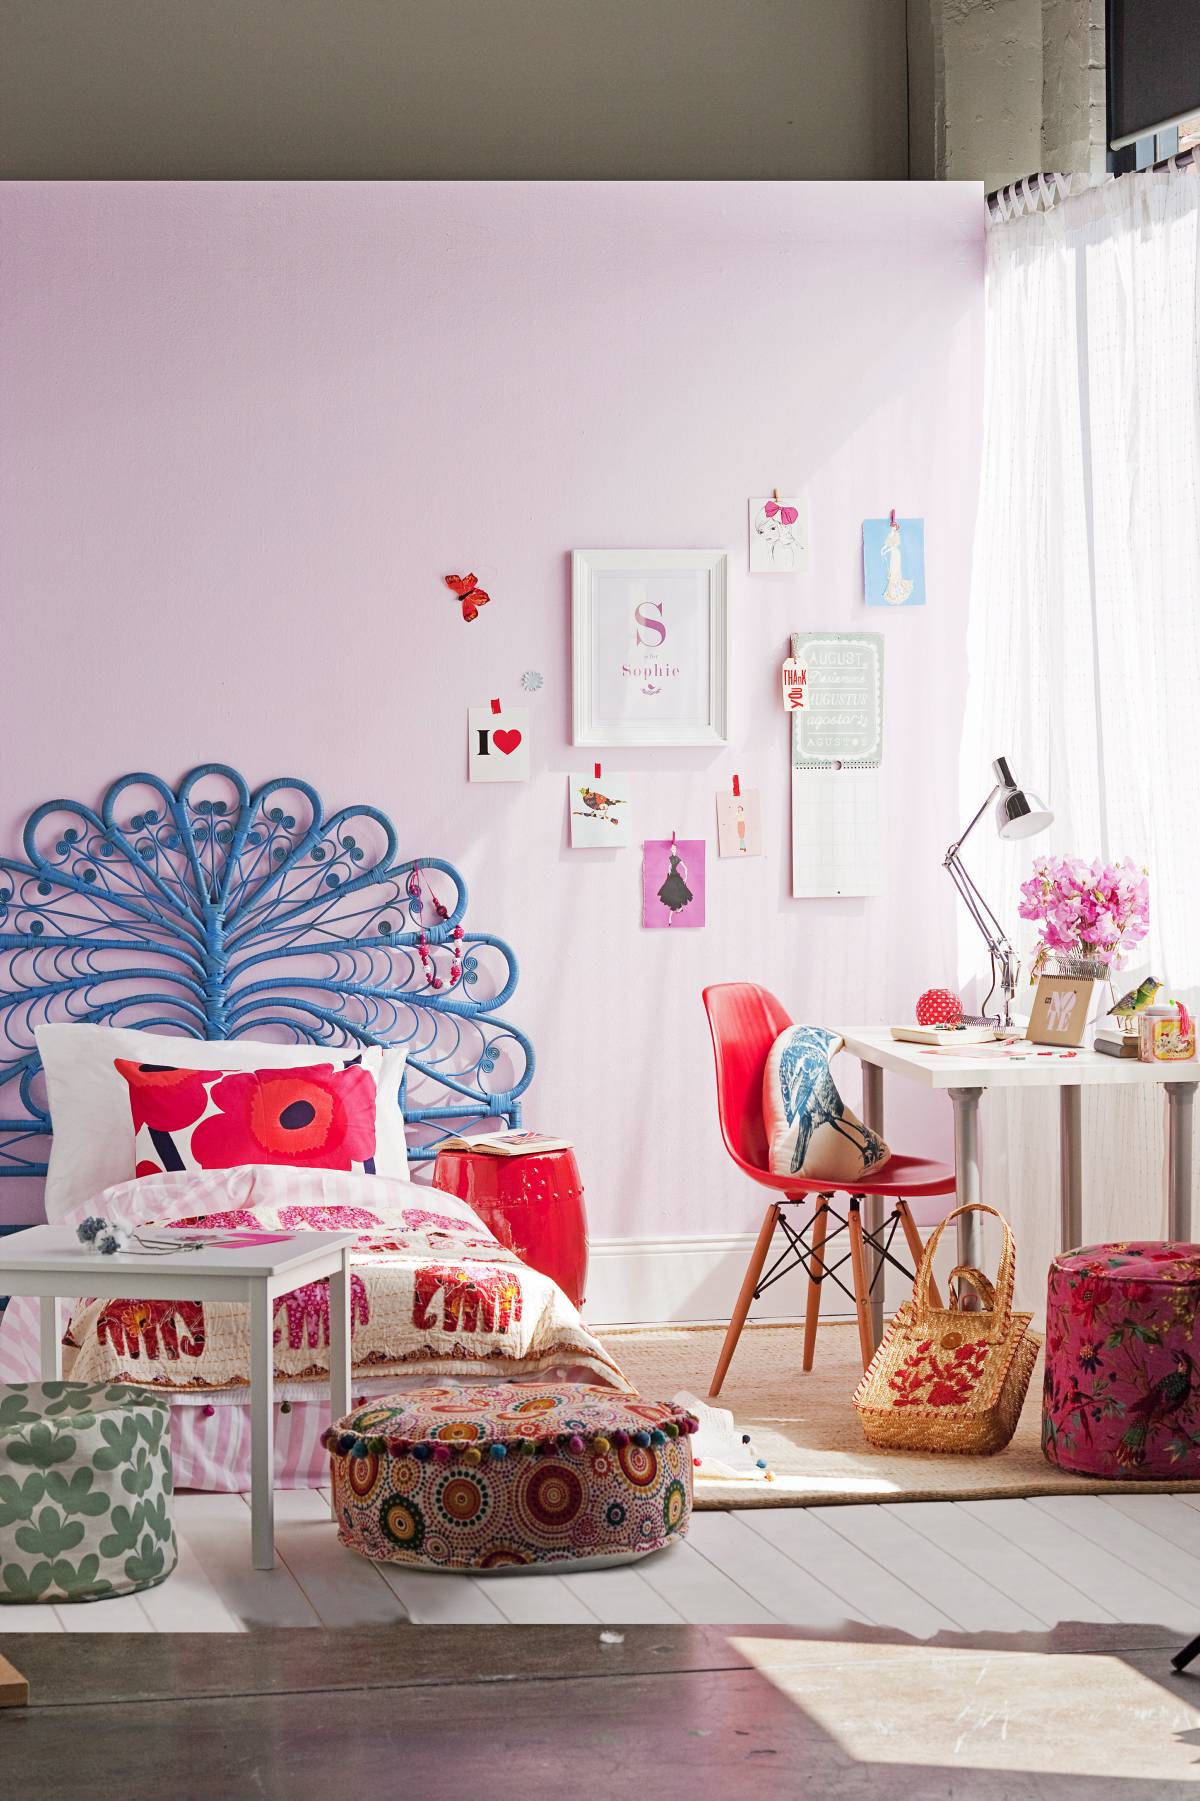 Kids’ bedrooms are more than just places to sleep